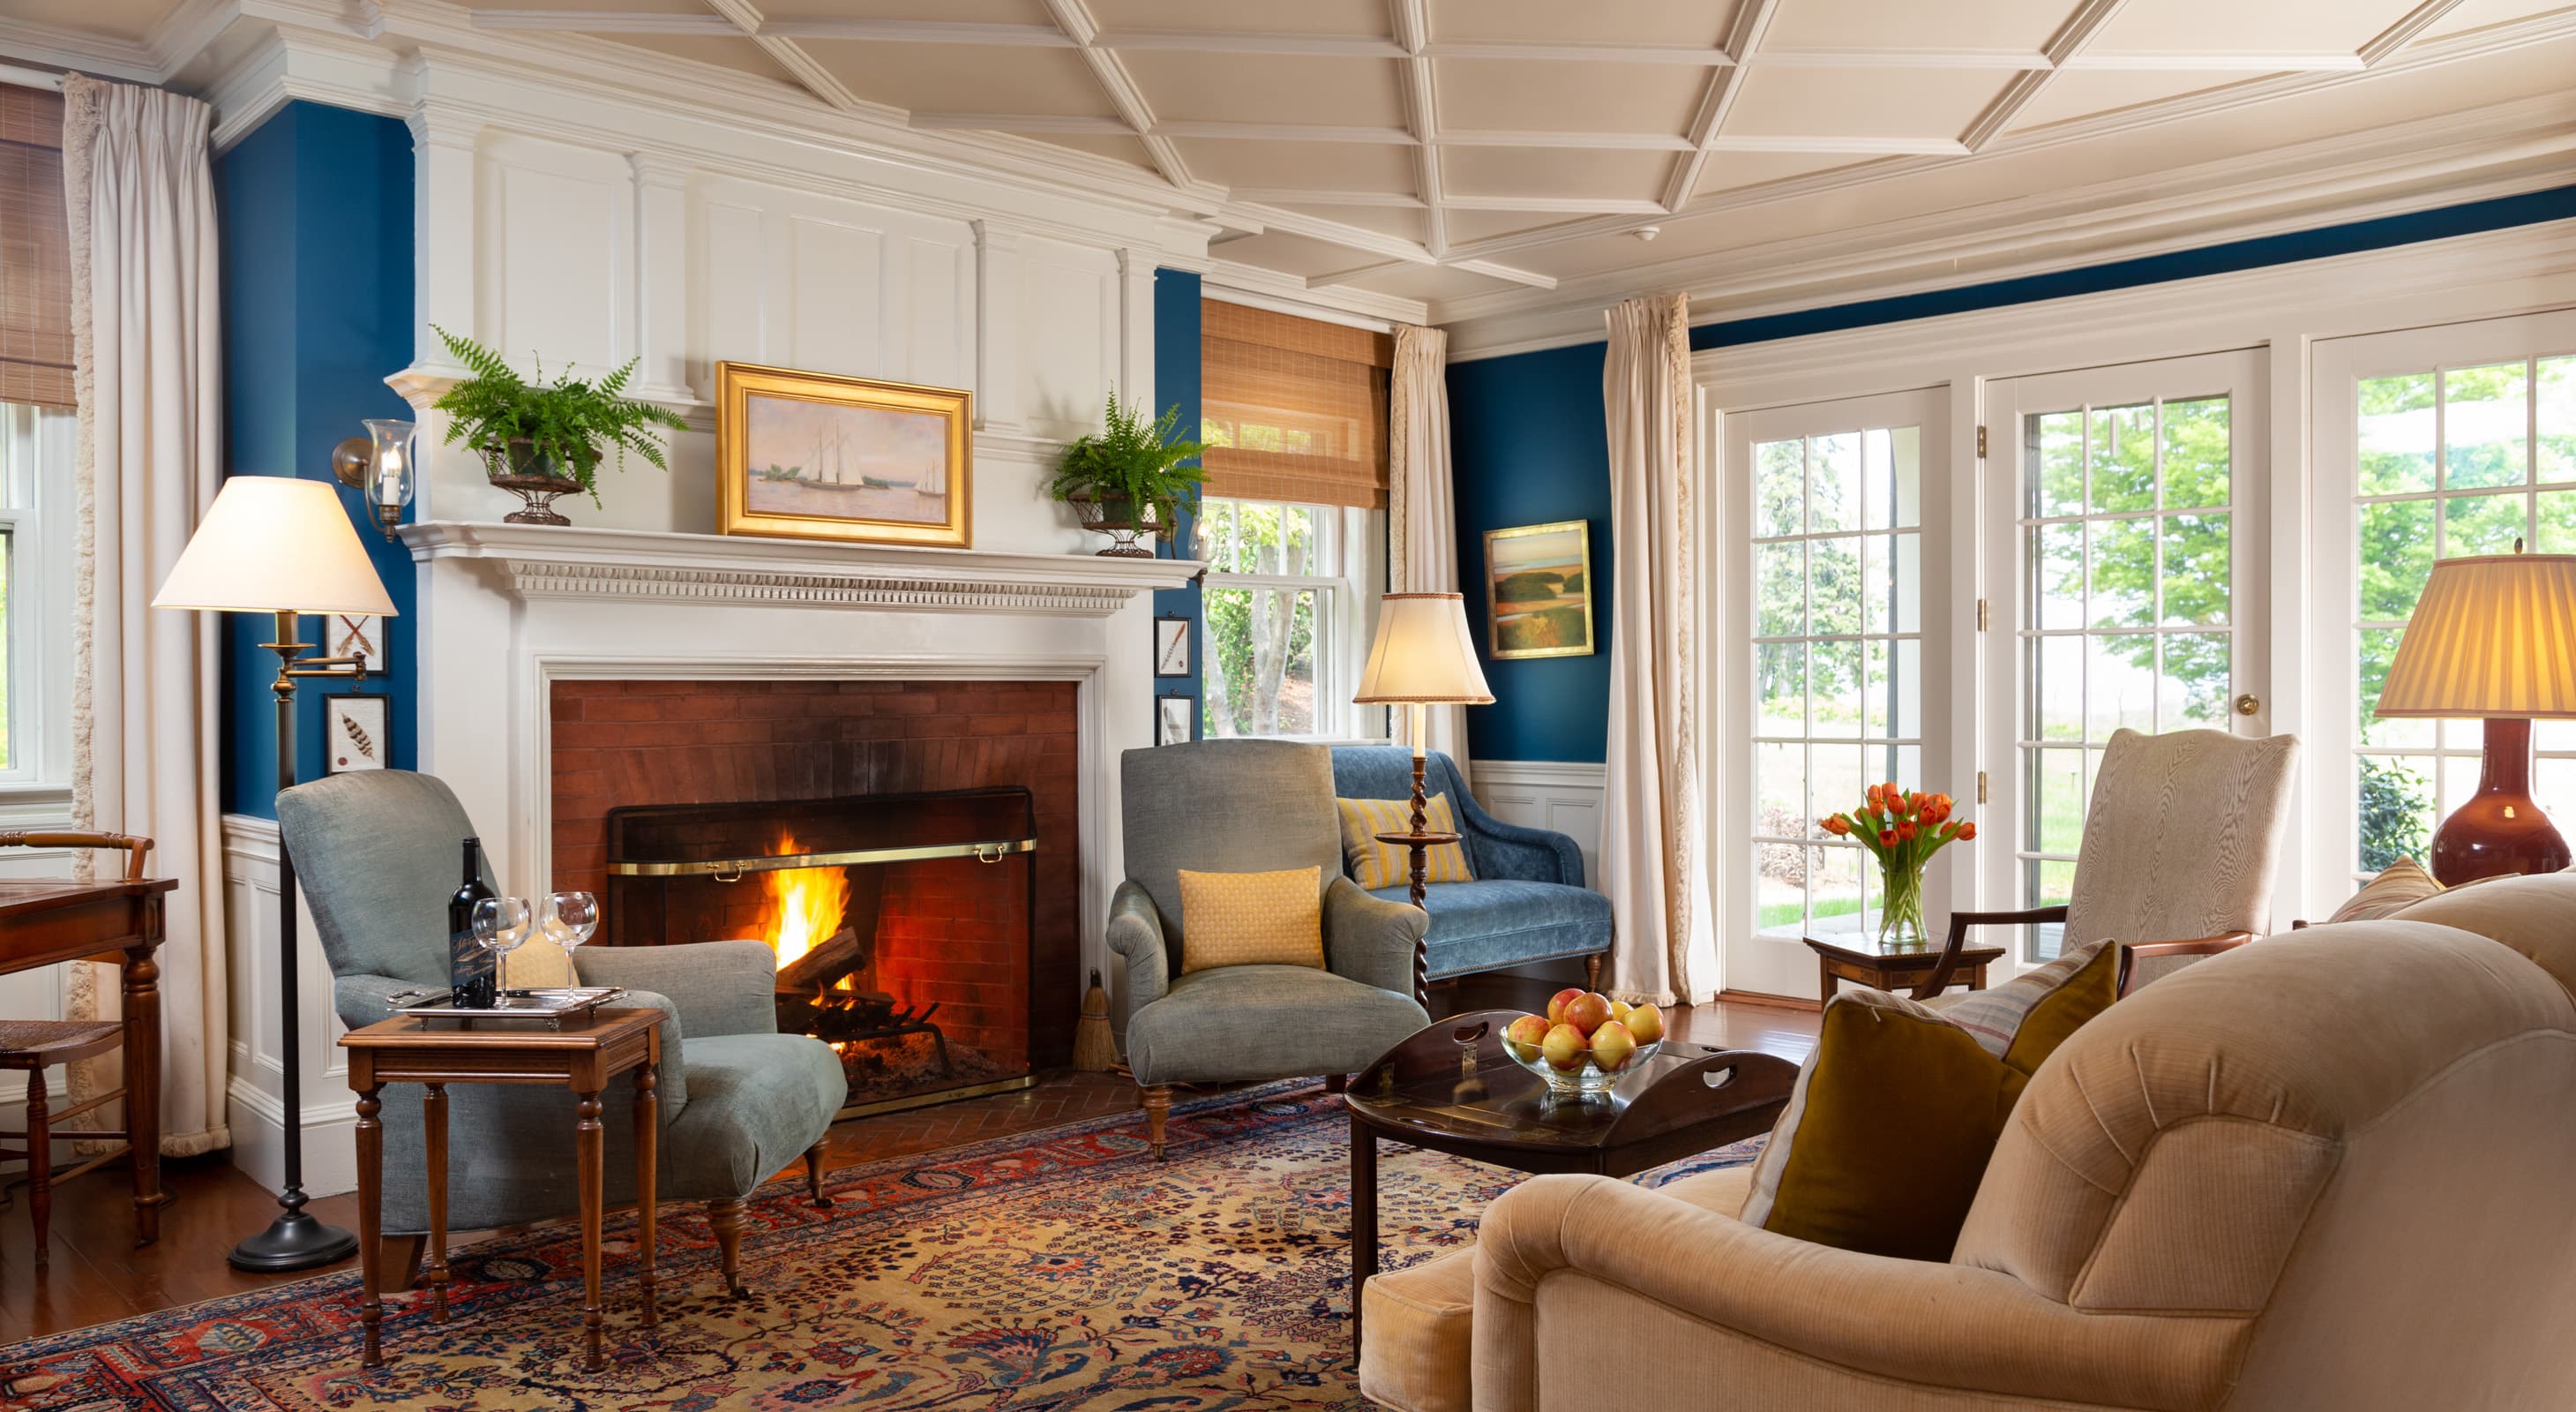 Common area with fireplace at wedding accommodations on the Crane Estate in Ipswich, MA